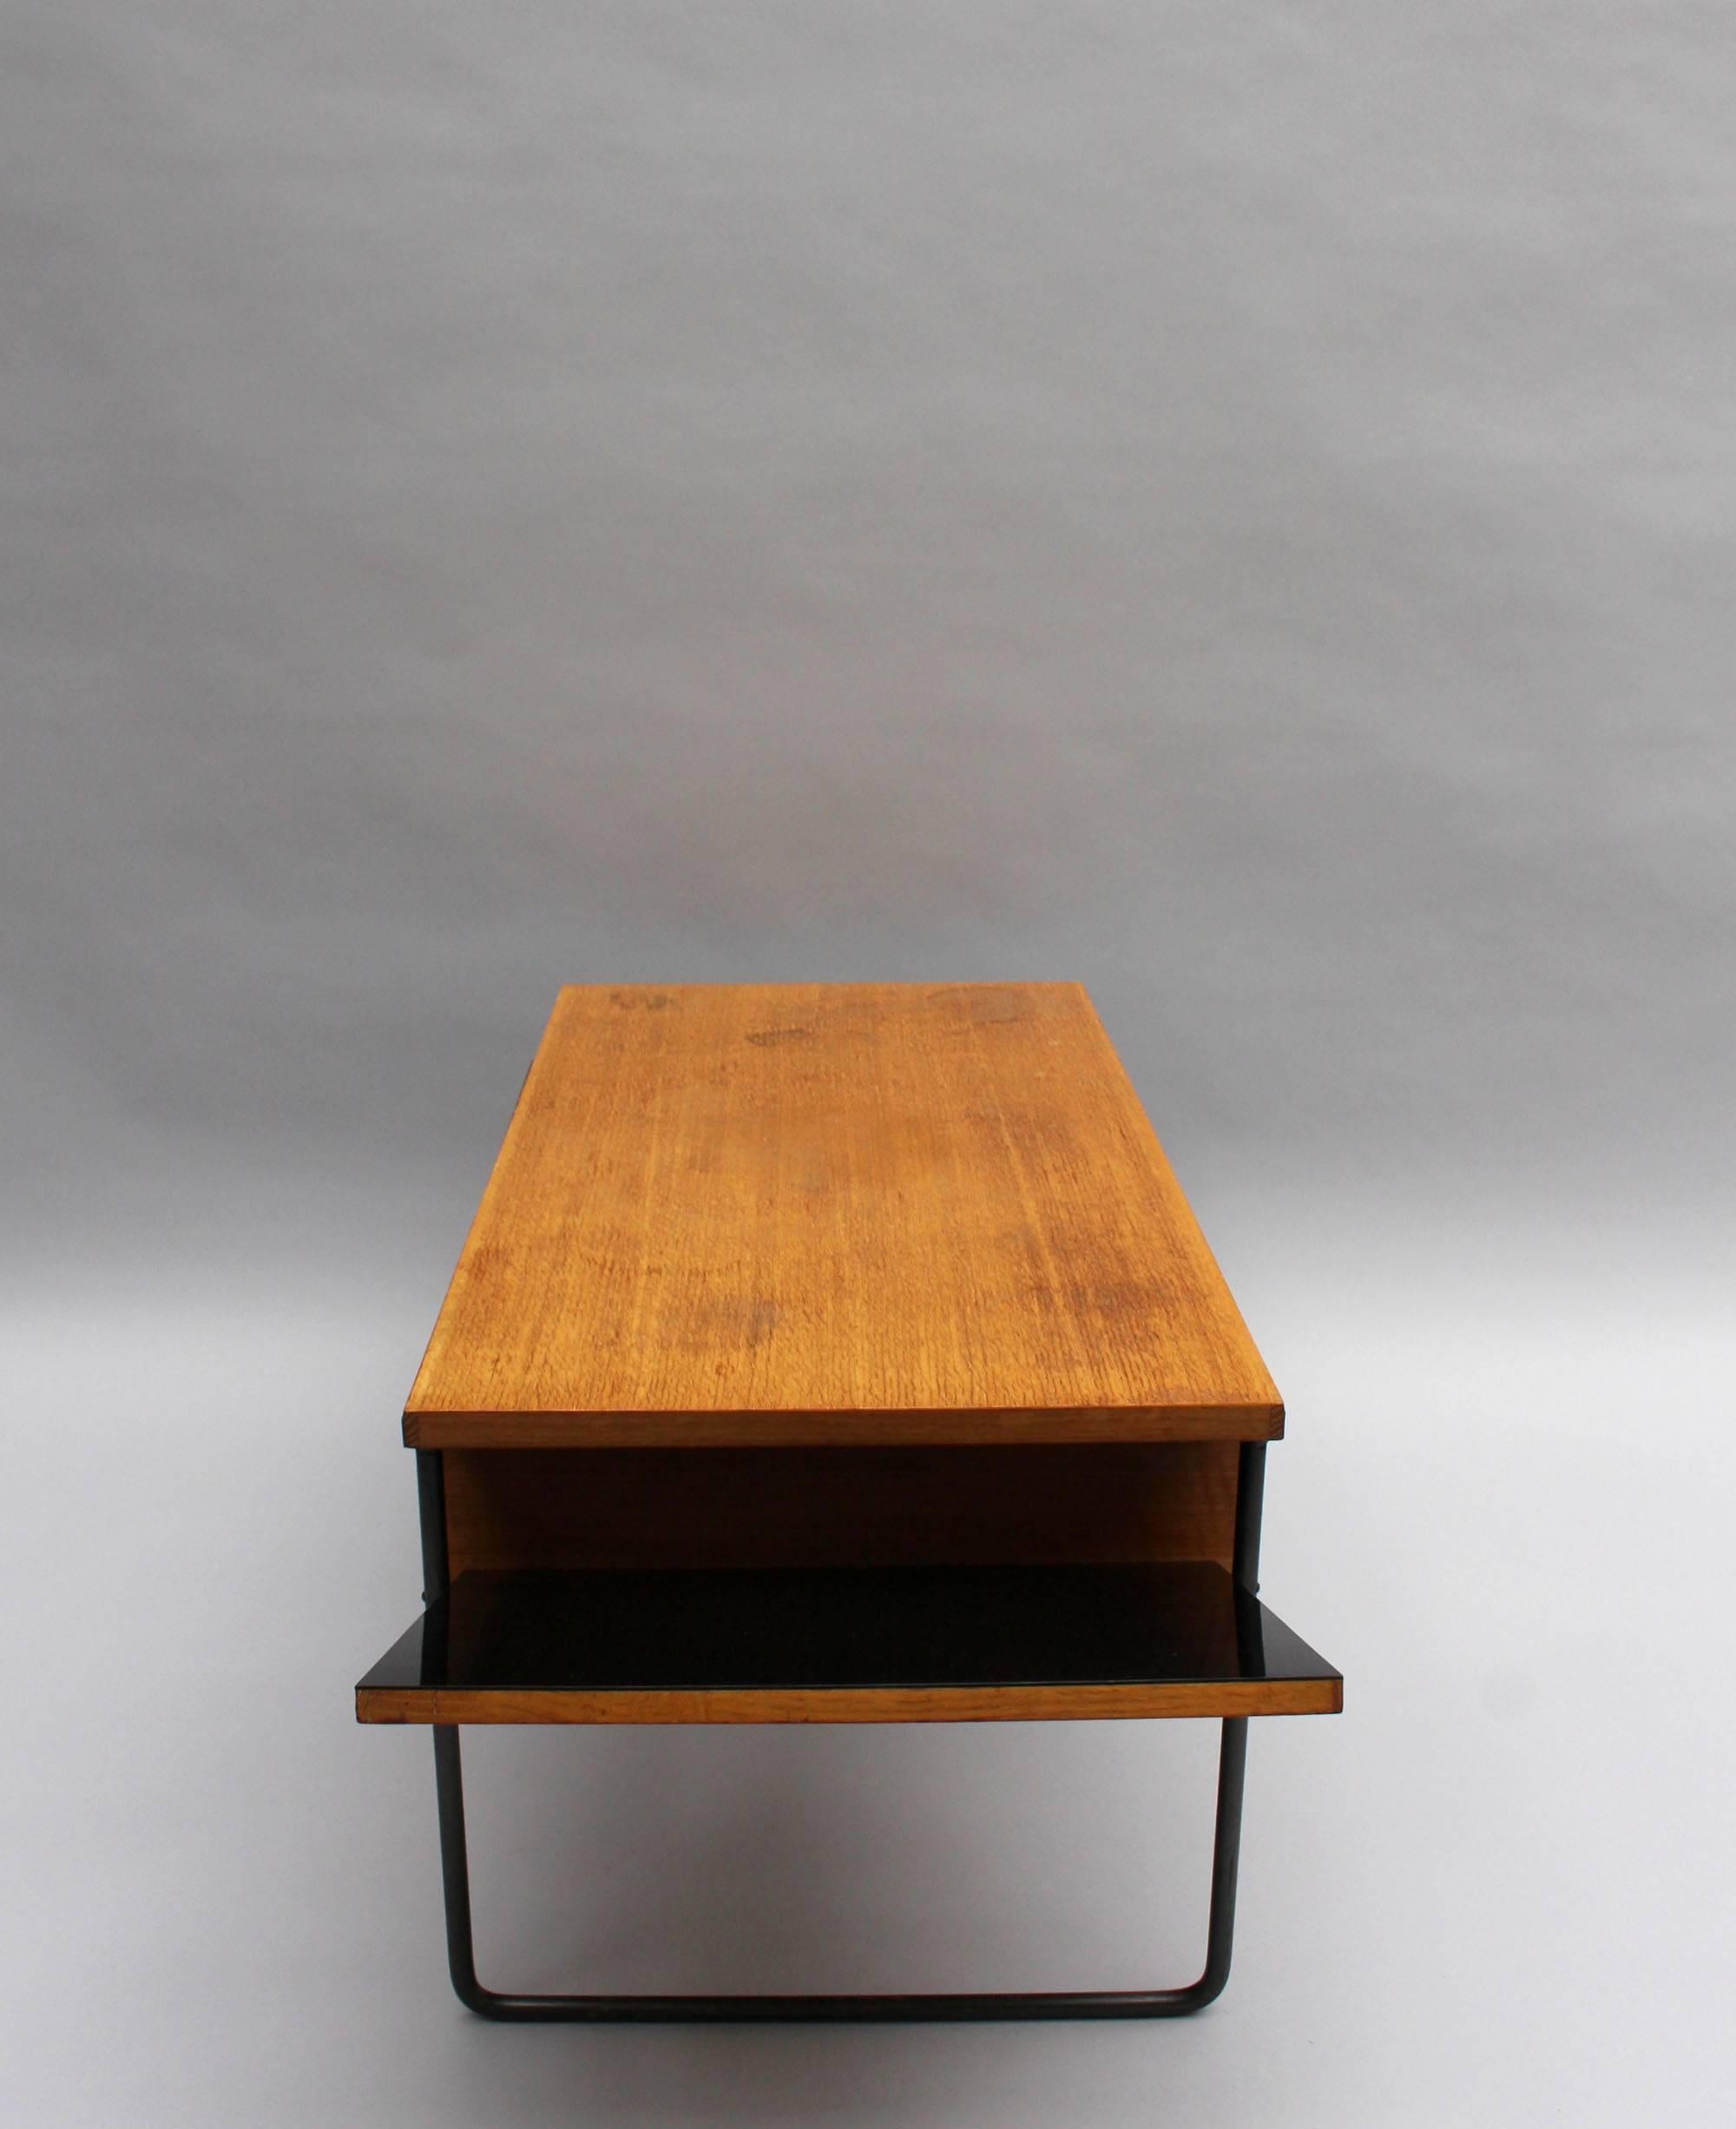 A Fine French Mid-Century Oak and Laminate Coffee Table with a Metal Base 1